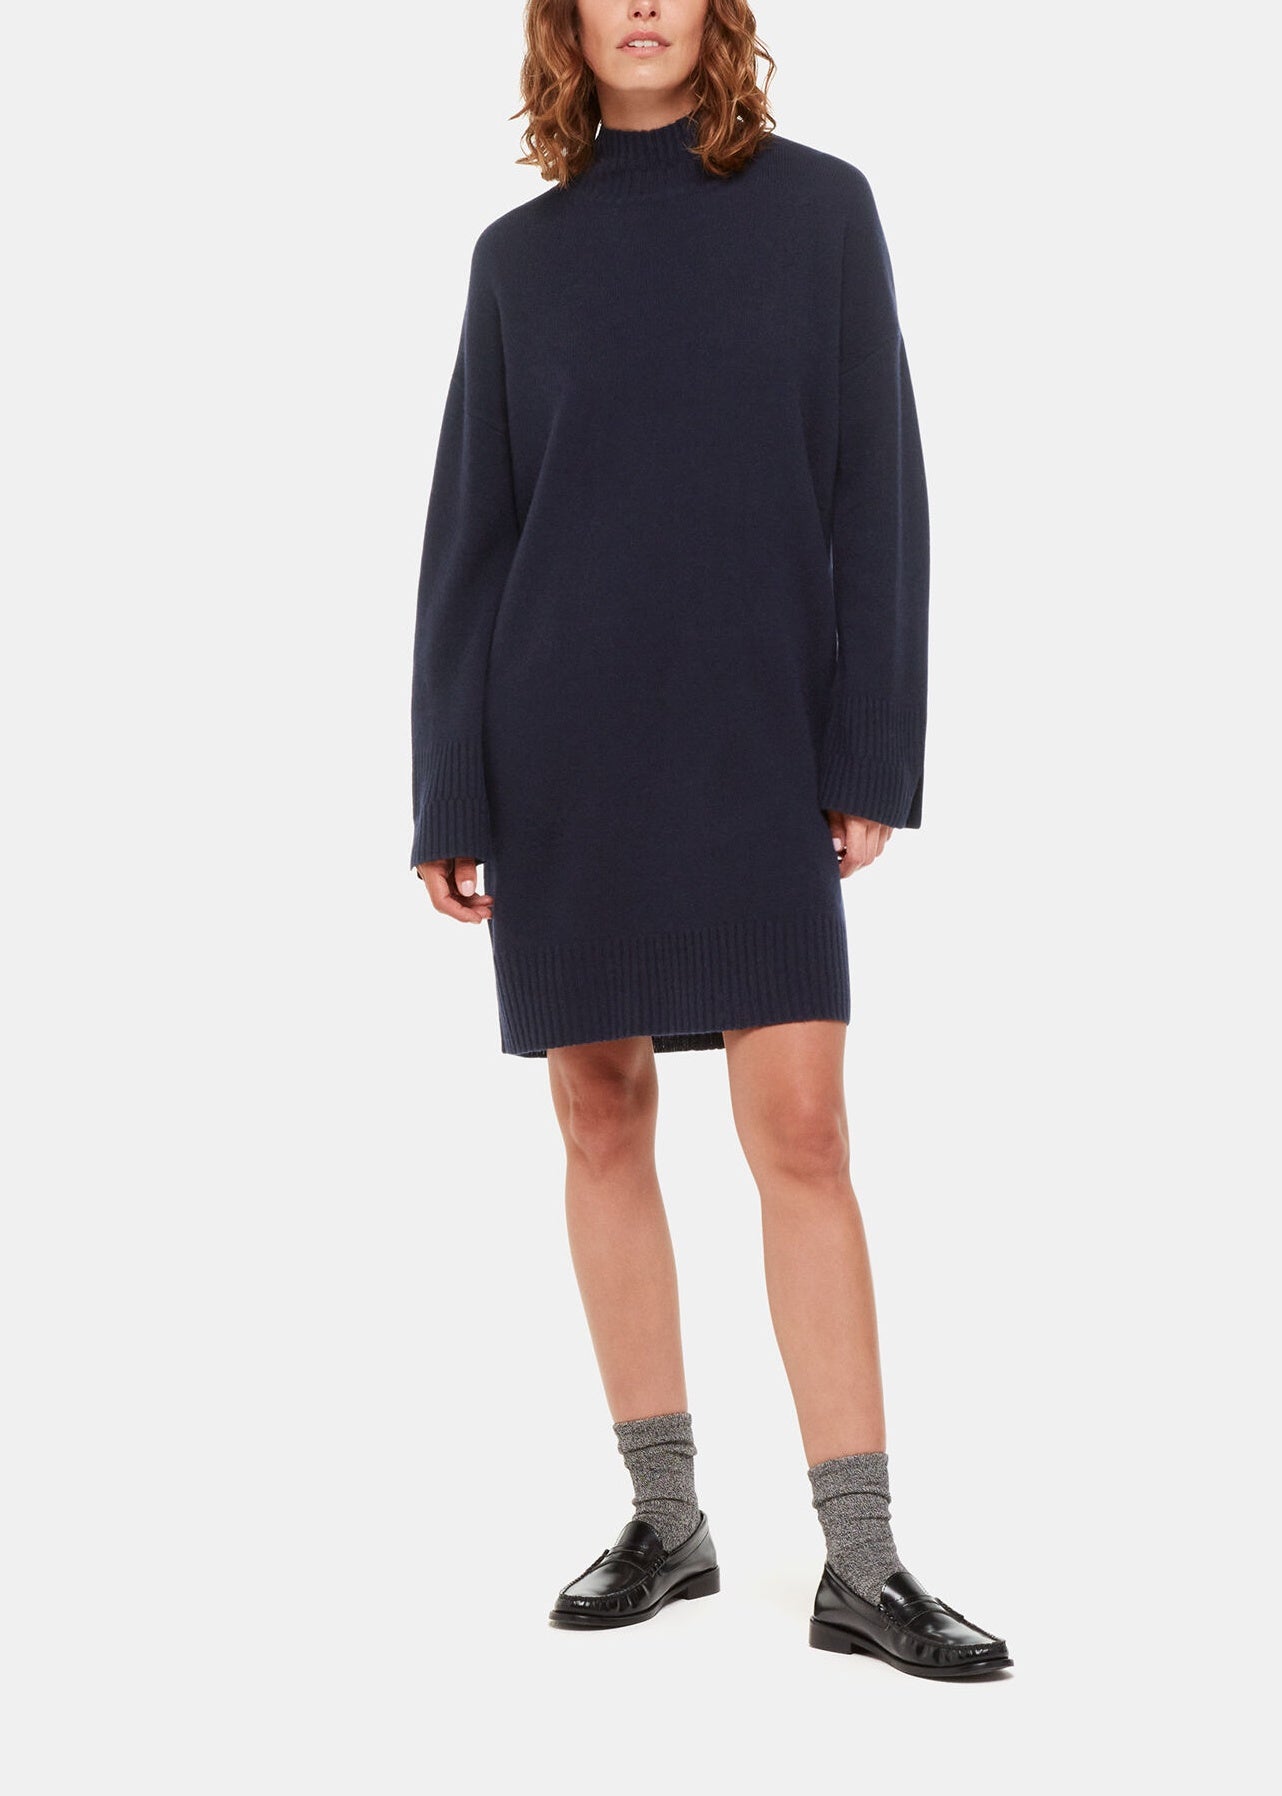 Amelia Wool Knitted Dress 37266 Navy